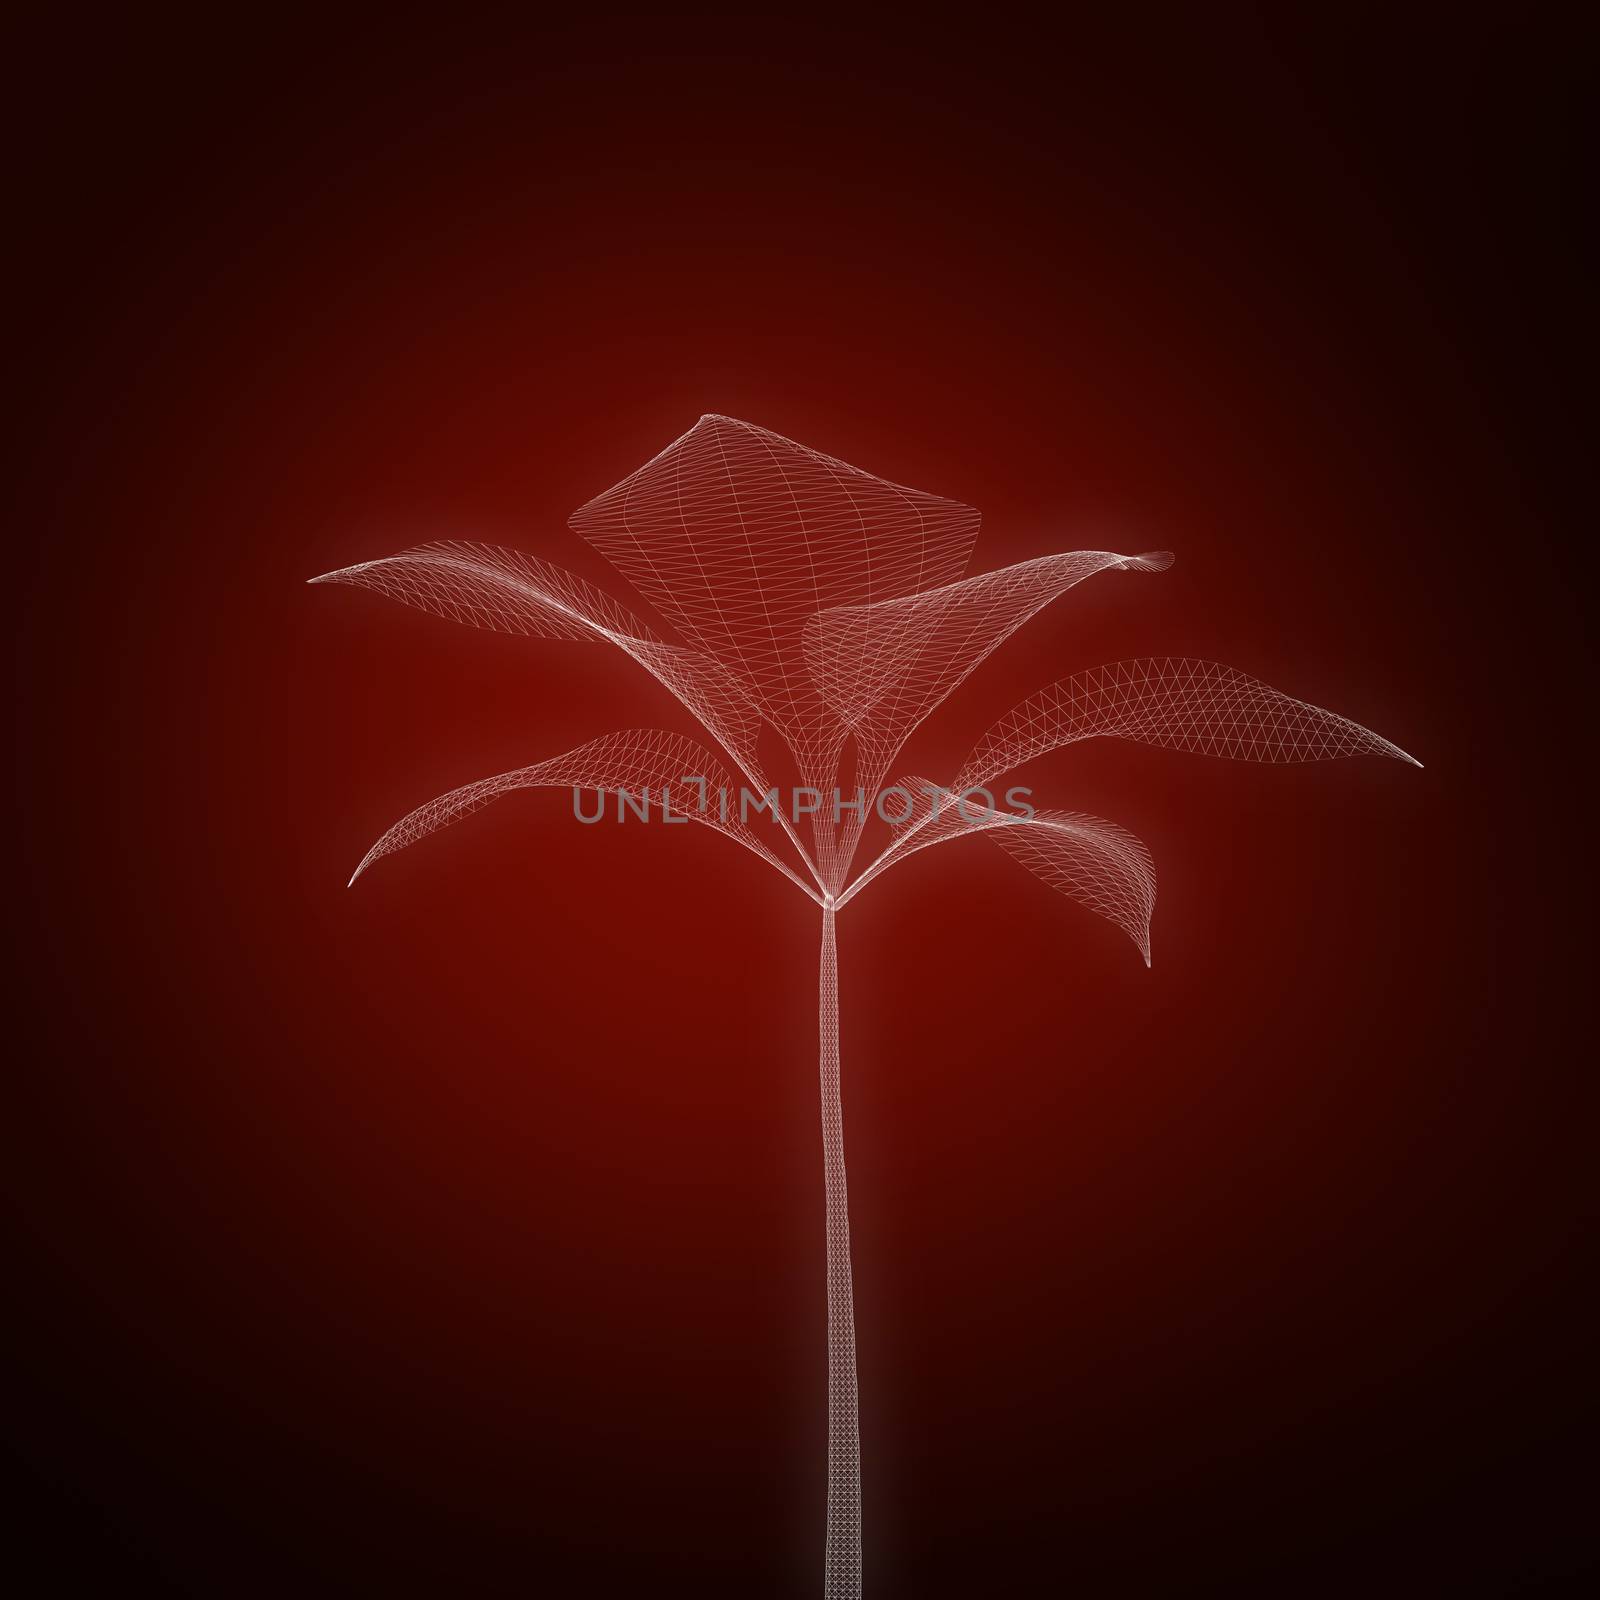 3d image of plant stem  against red background with vignette